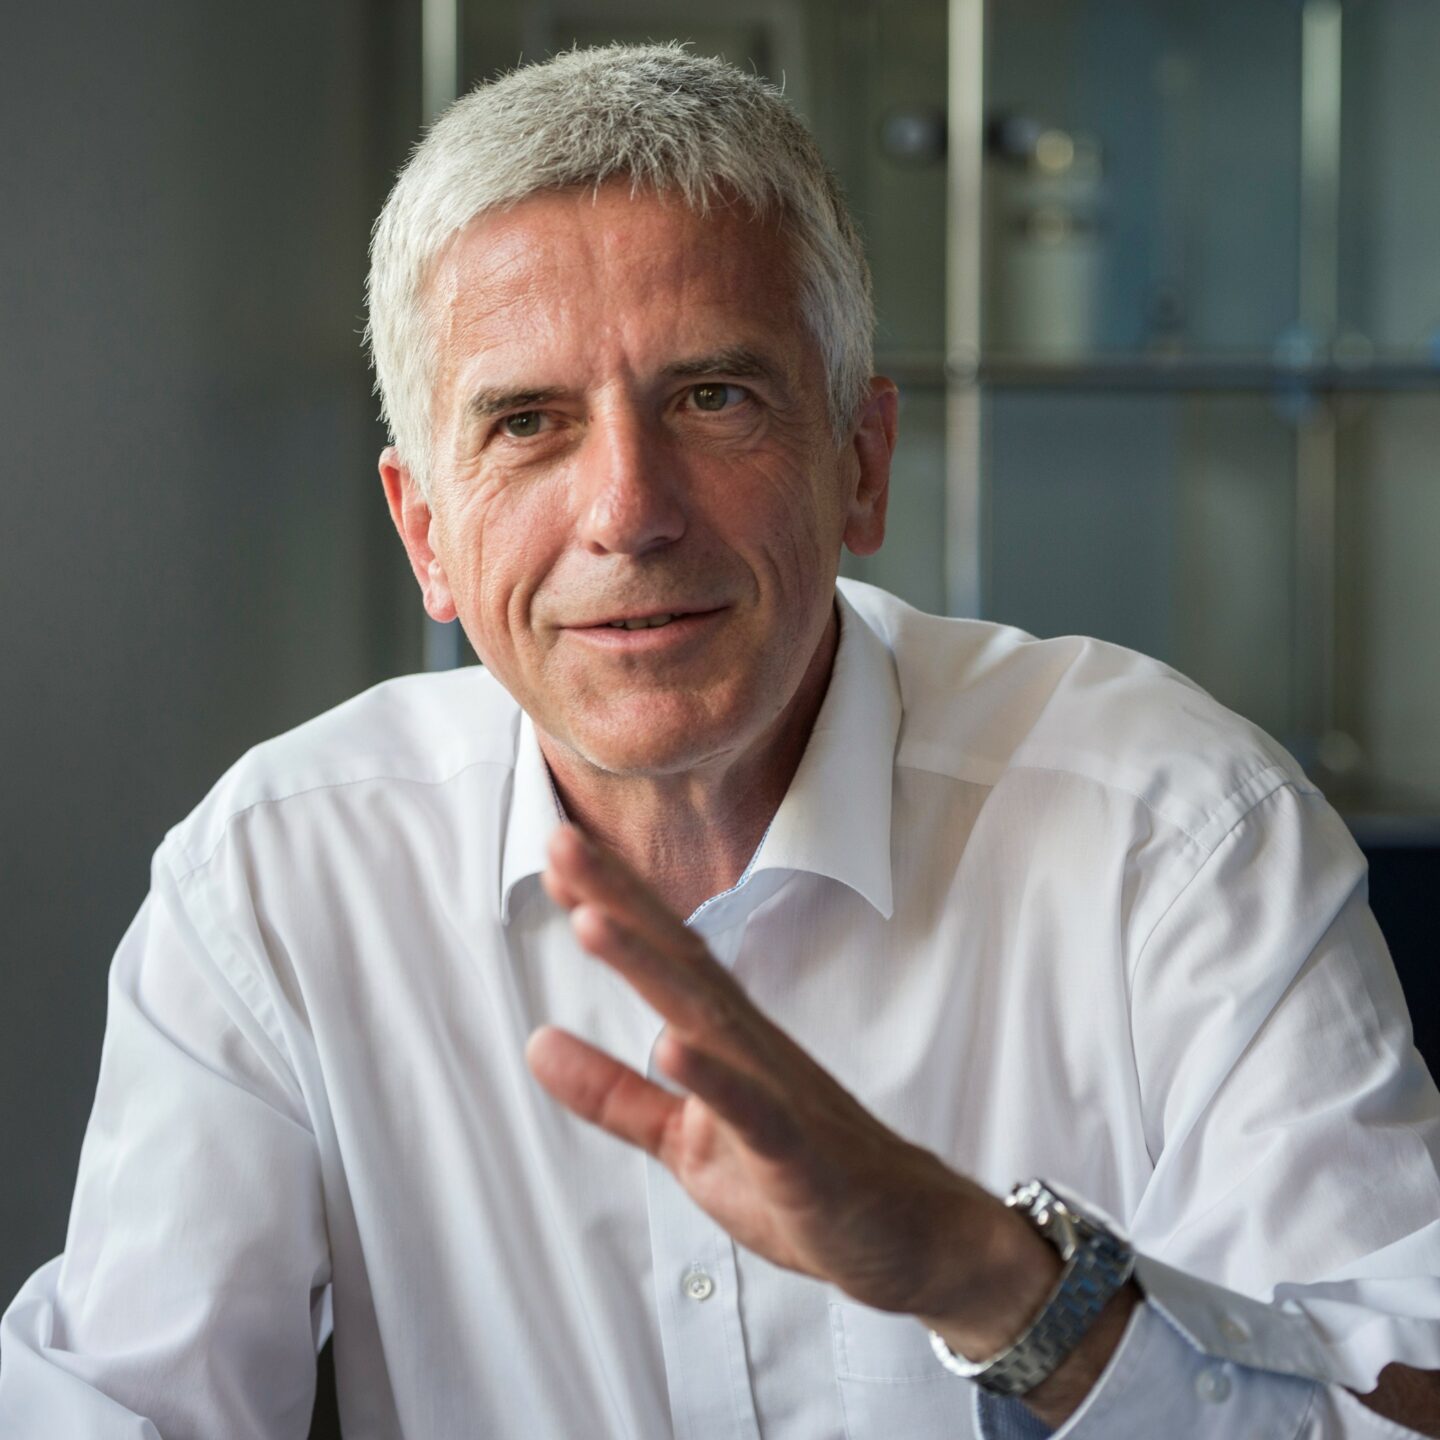 White-haired man in white shirt pictured explaining something with a hand gesture.